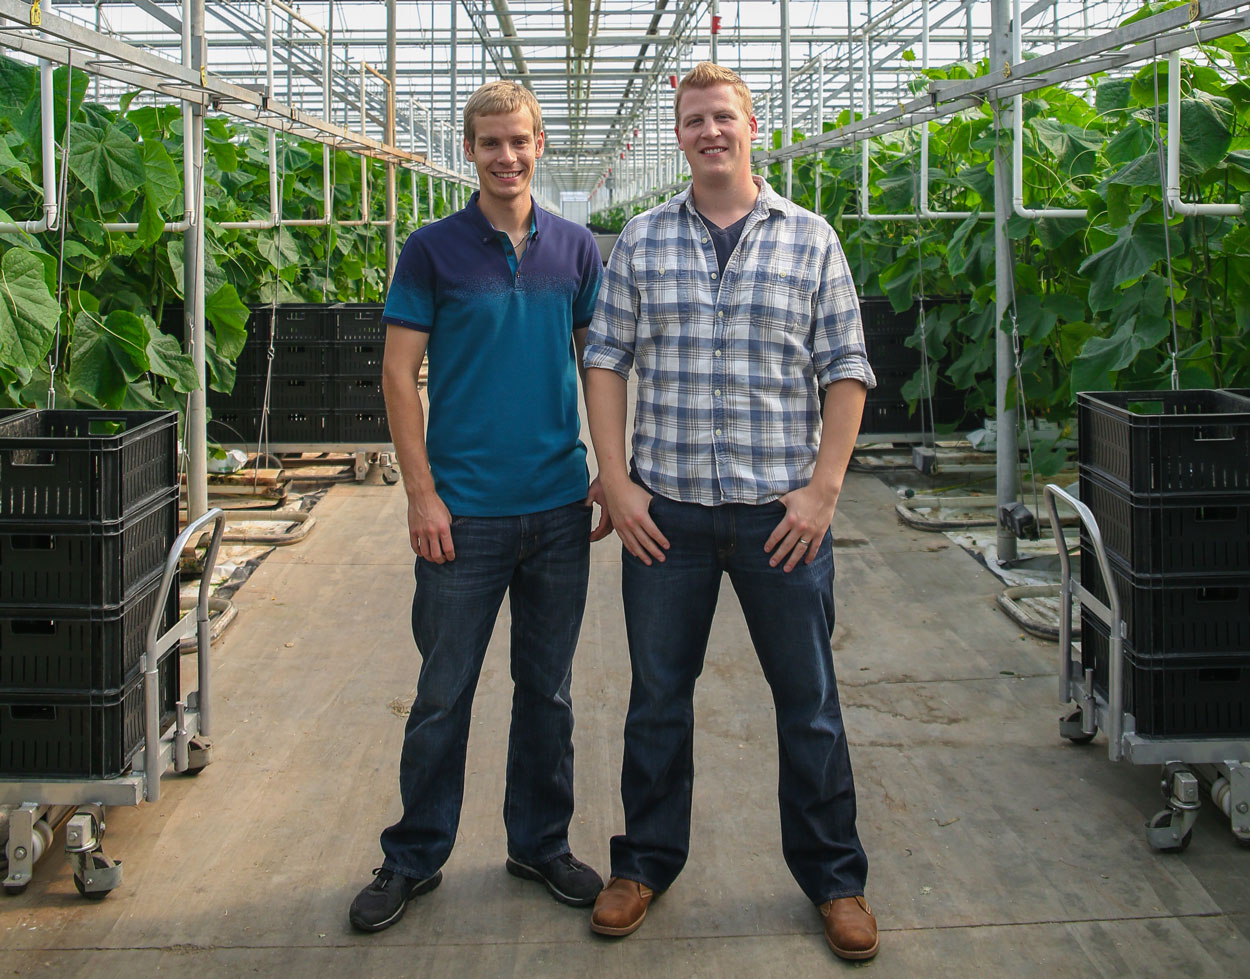 Trevor Voorberg and Chris Voorberg pose for a photo in the greenhouse